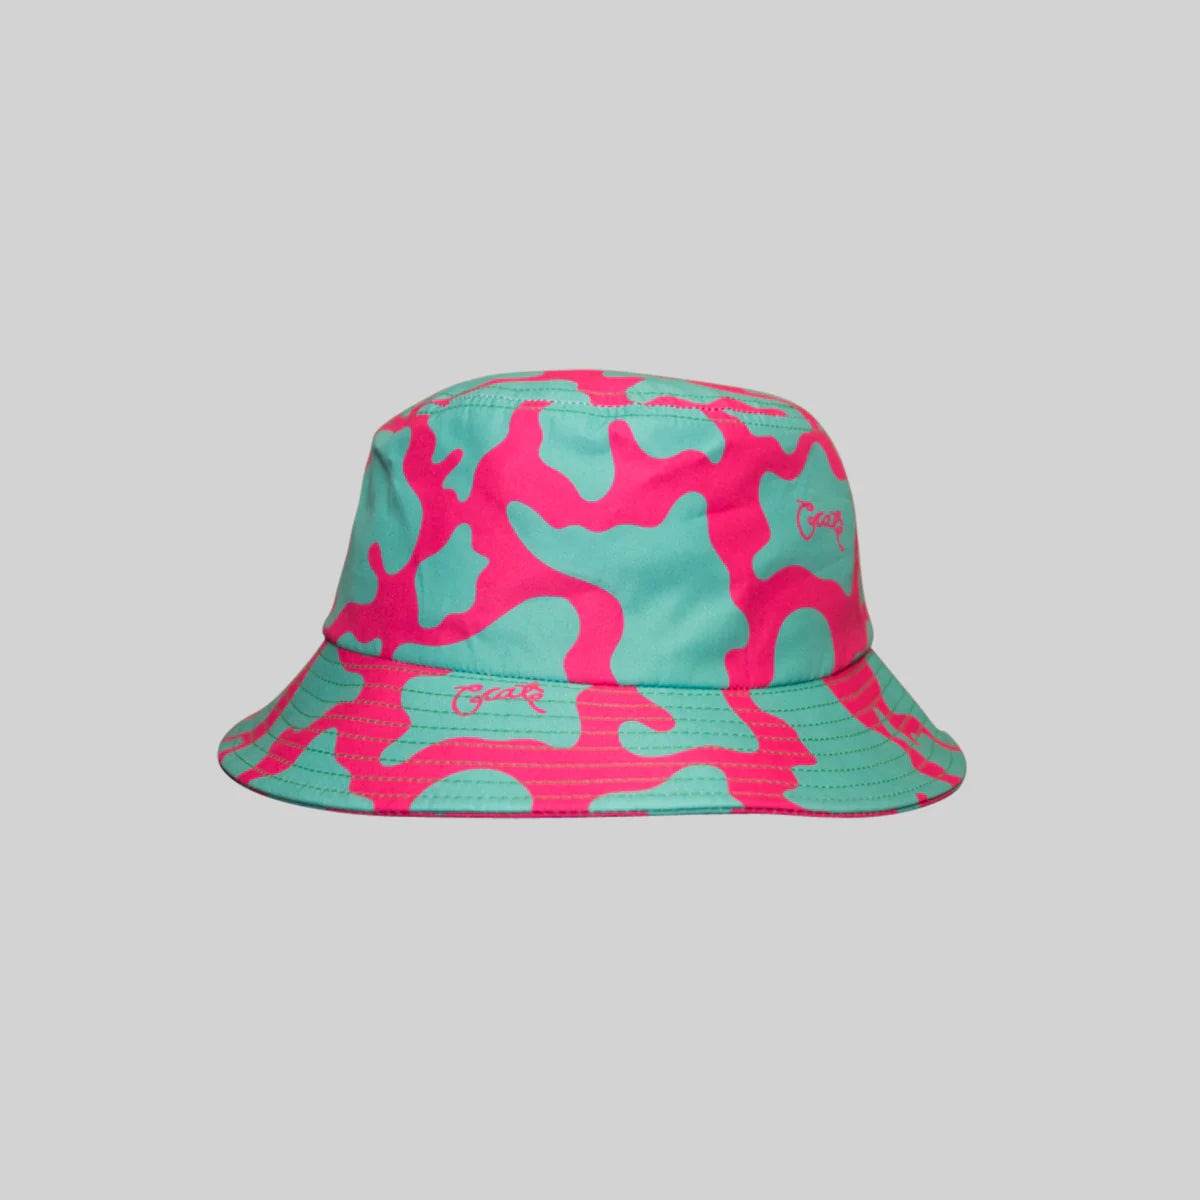 Crate Party time Bucket Hat